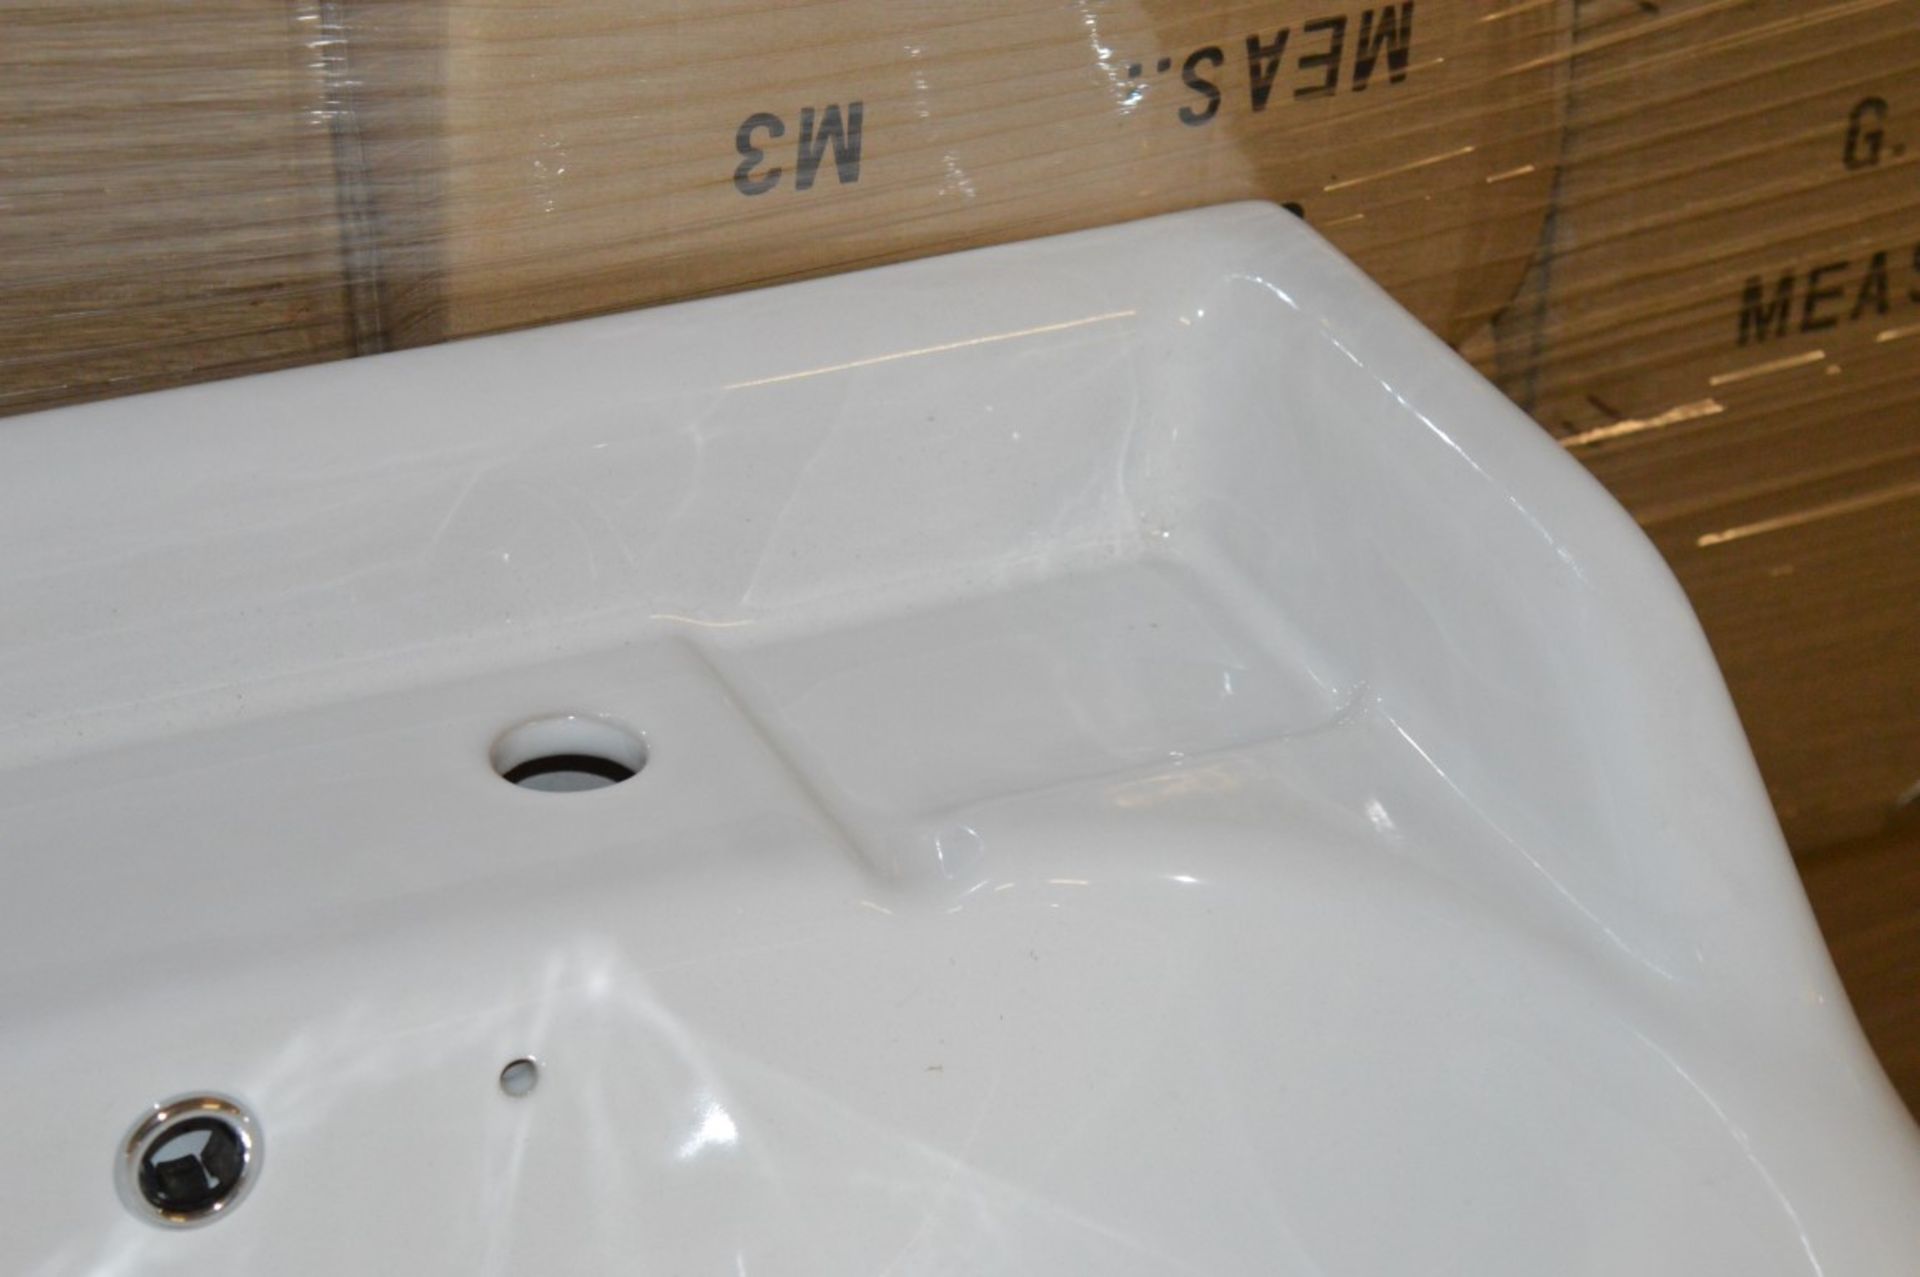 1 x Vogue Bathrooms BELTON Single Tap Hole SINK BASIN With Pedestal - 580mm Width - Brand New - Image 4 of 5